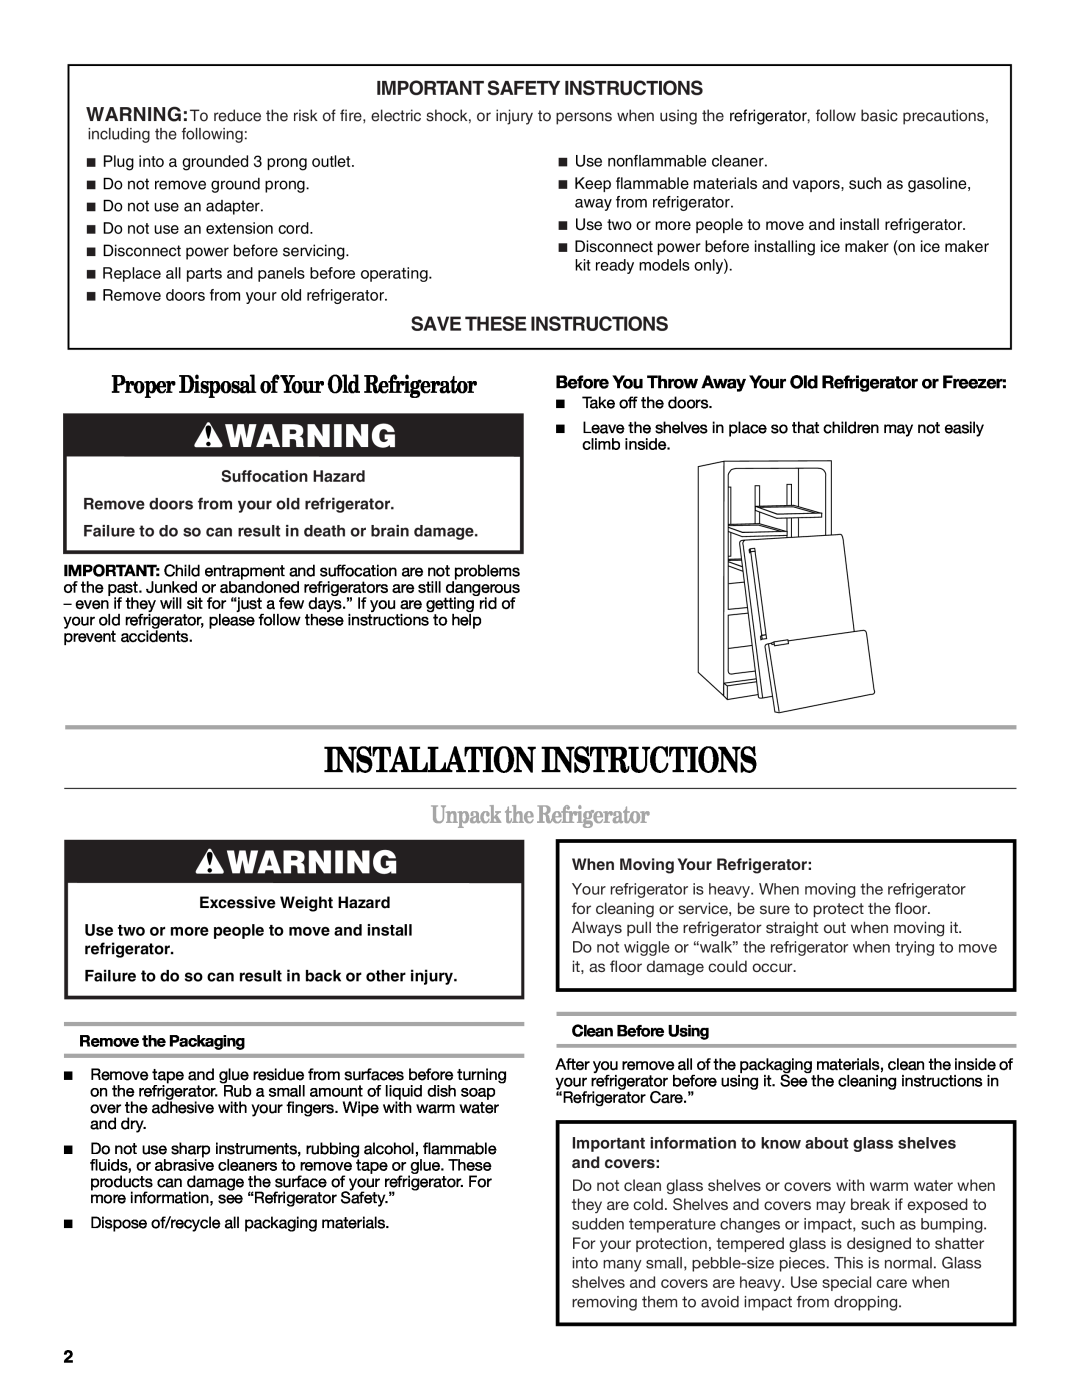 Whirlpool W10200283A Installation Instructions, Unpack the Refrigerator, Important Safety Instructions, Clean Before Using 